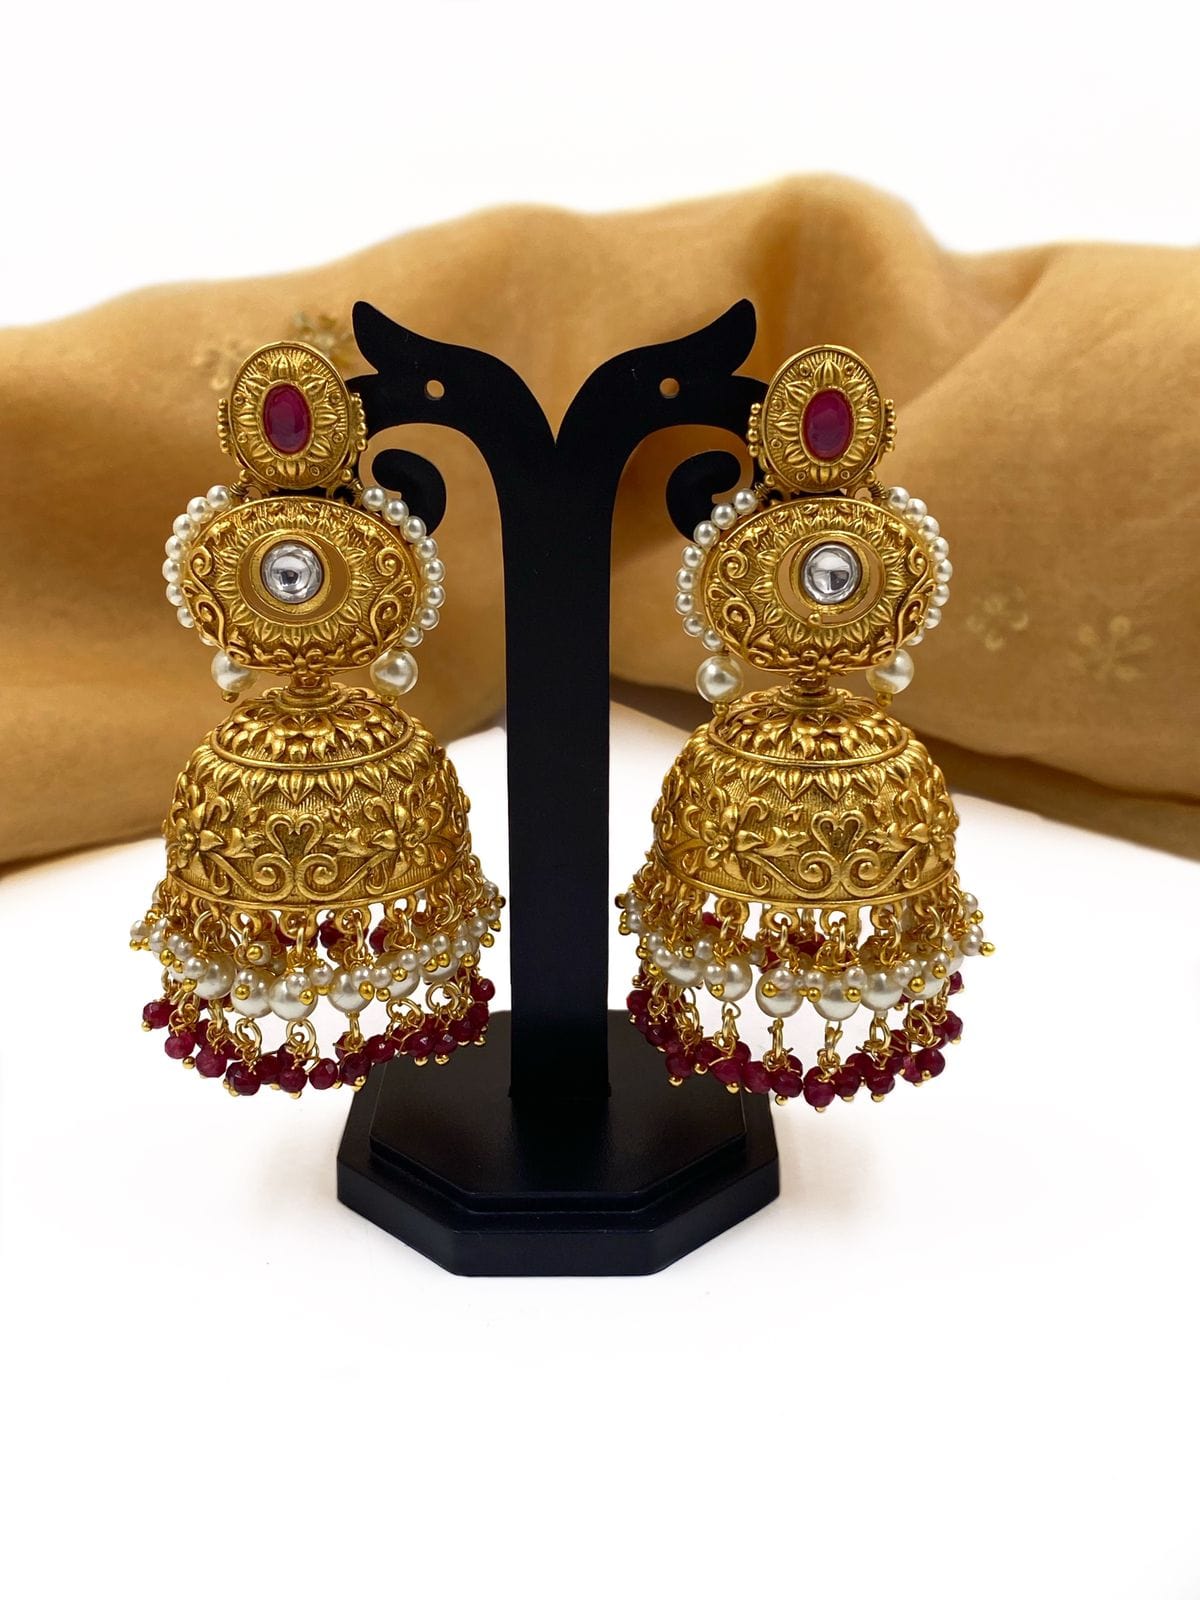 Chain jhumka earrings - urban junky's collections of jewellery